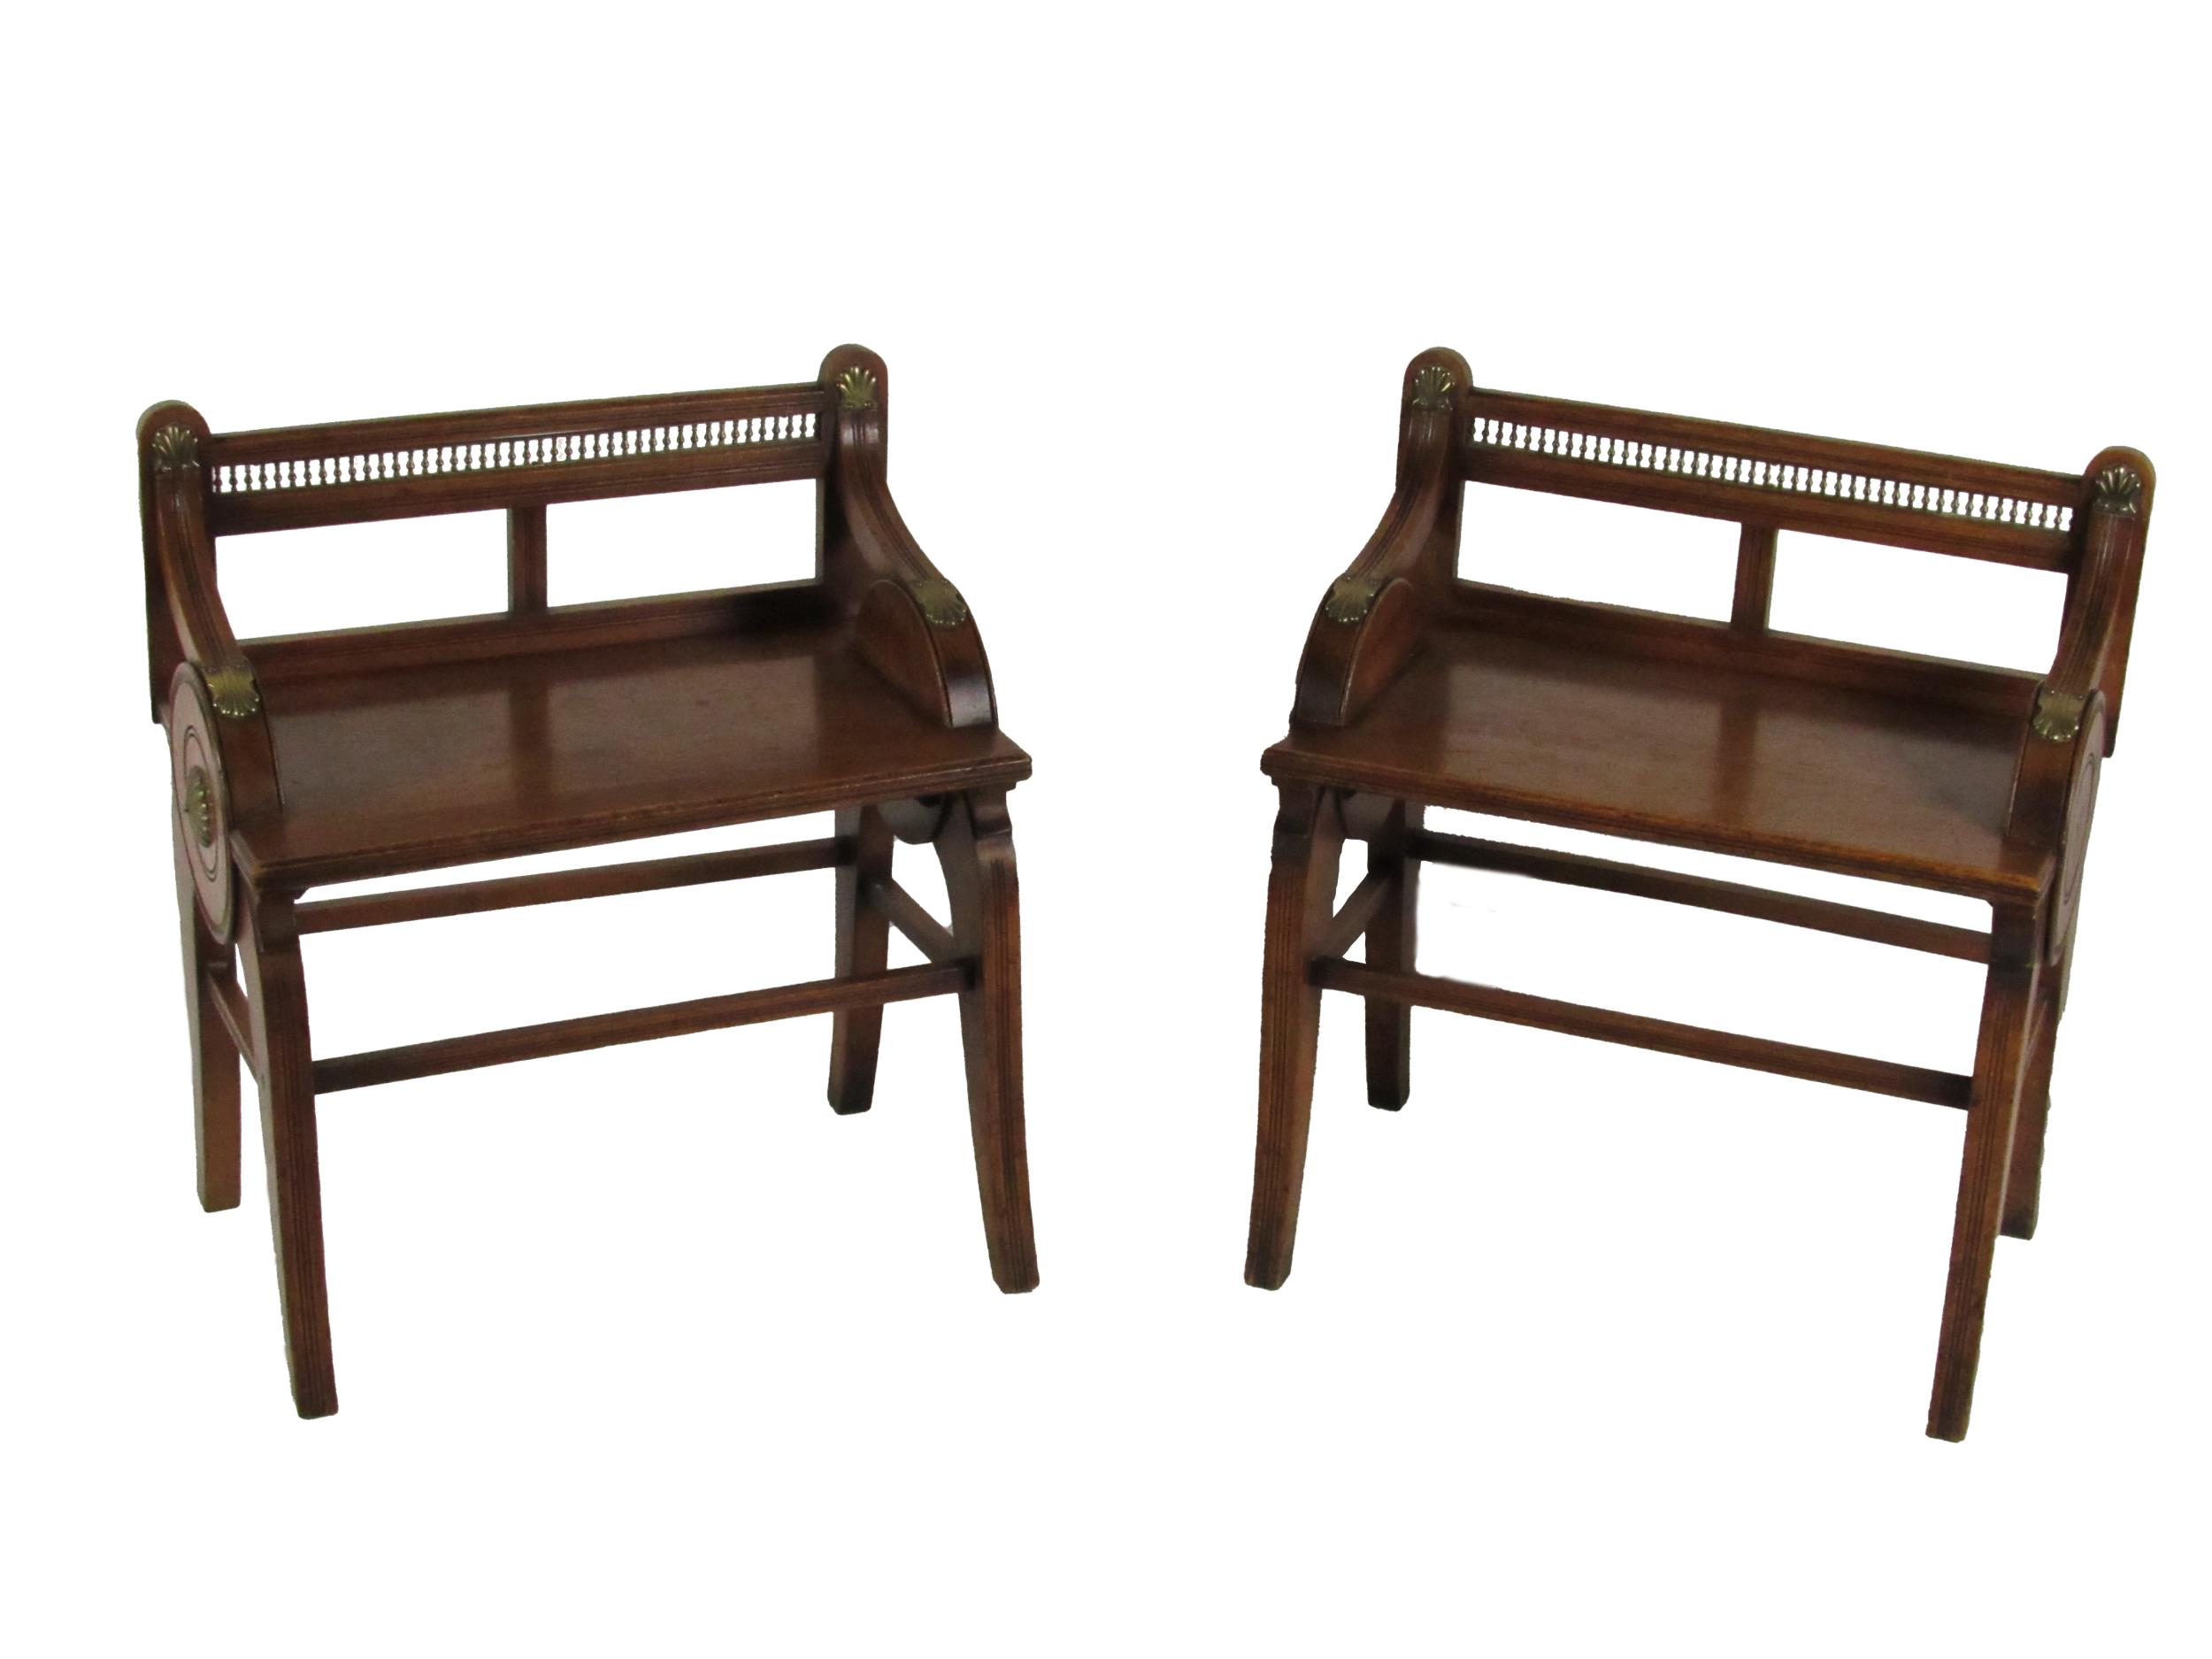 A pair of Victorian oak Hall Seats, attributed to Joe Shoolbred & Co., each back with two open